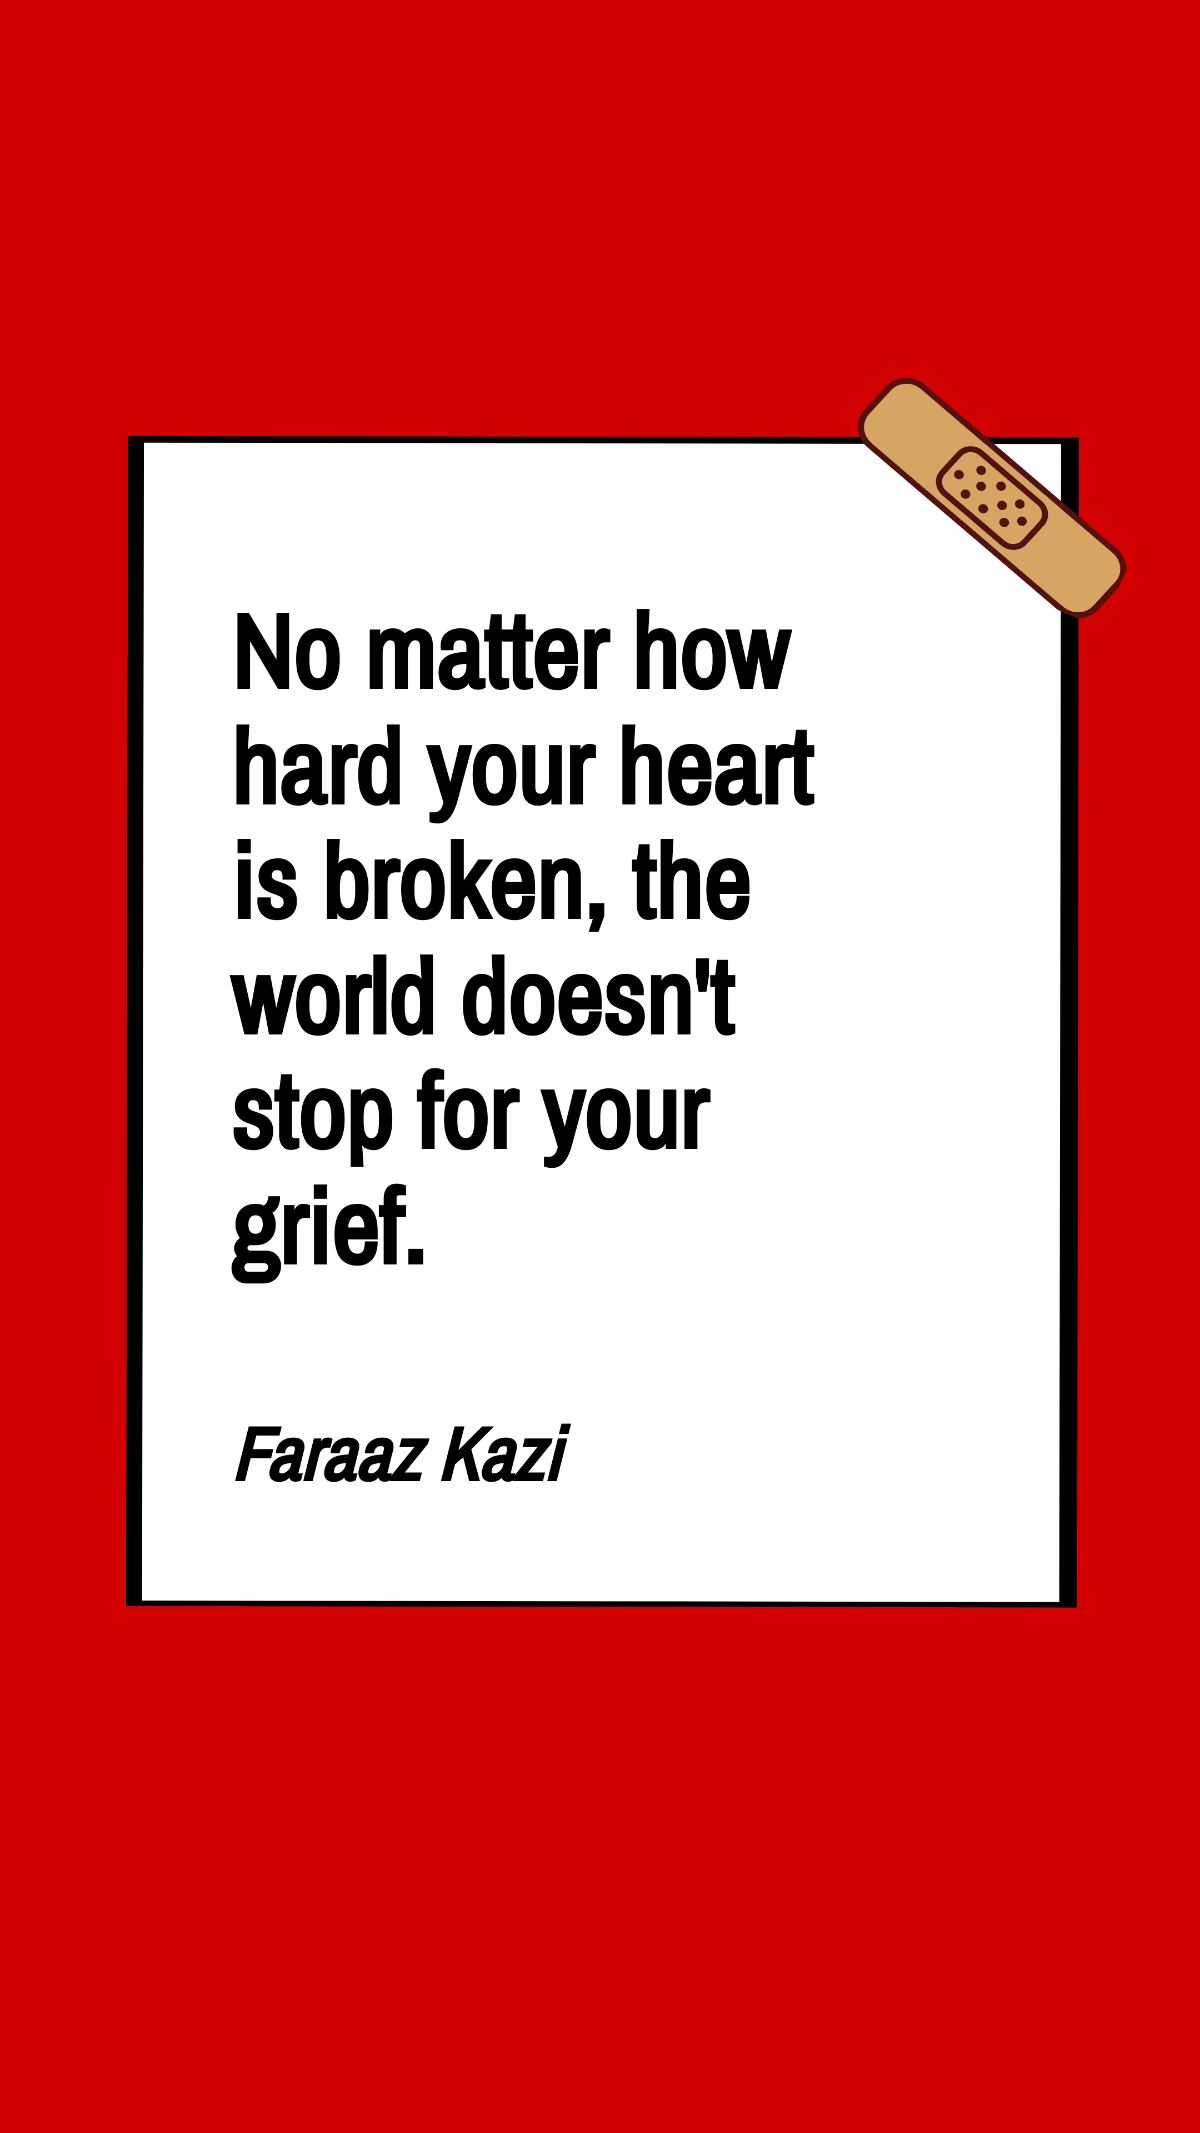 Faraaz Kazi - No matter how hard your heart is broken, the world doesn't stop for your grief. Template